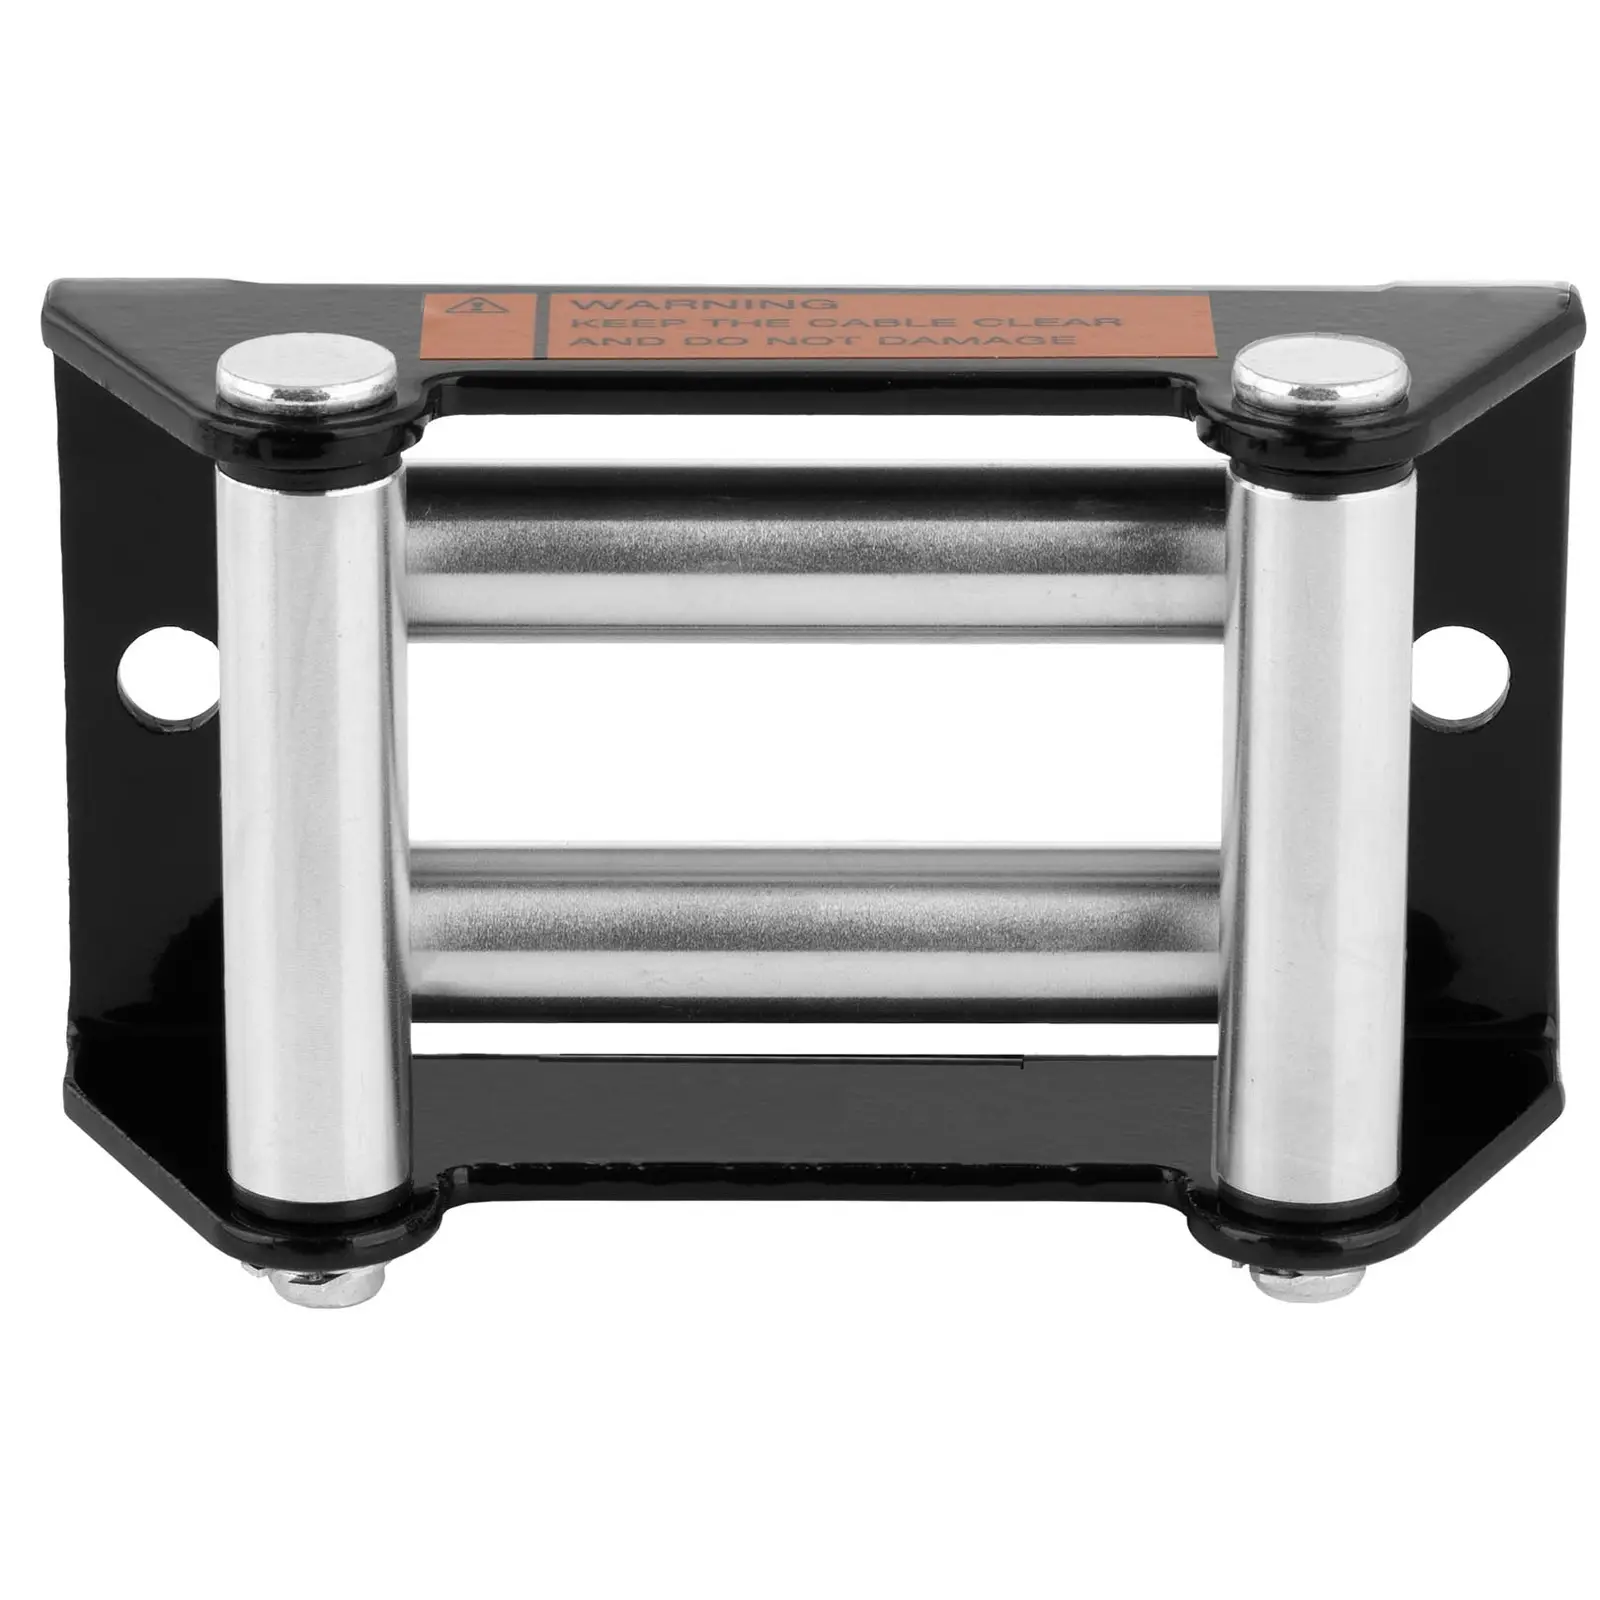 Fairlead Roller - 4 Rolls - up to 3.500 lbs/1.590 kg